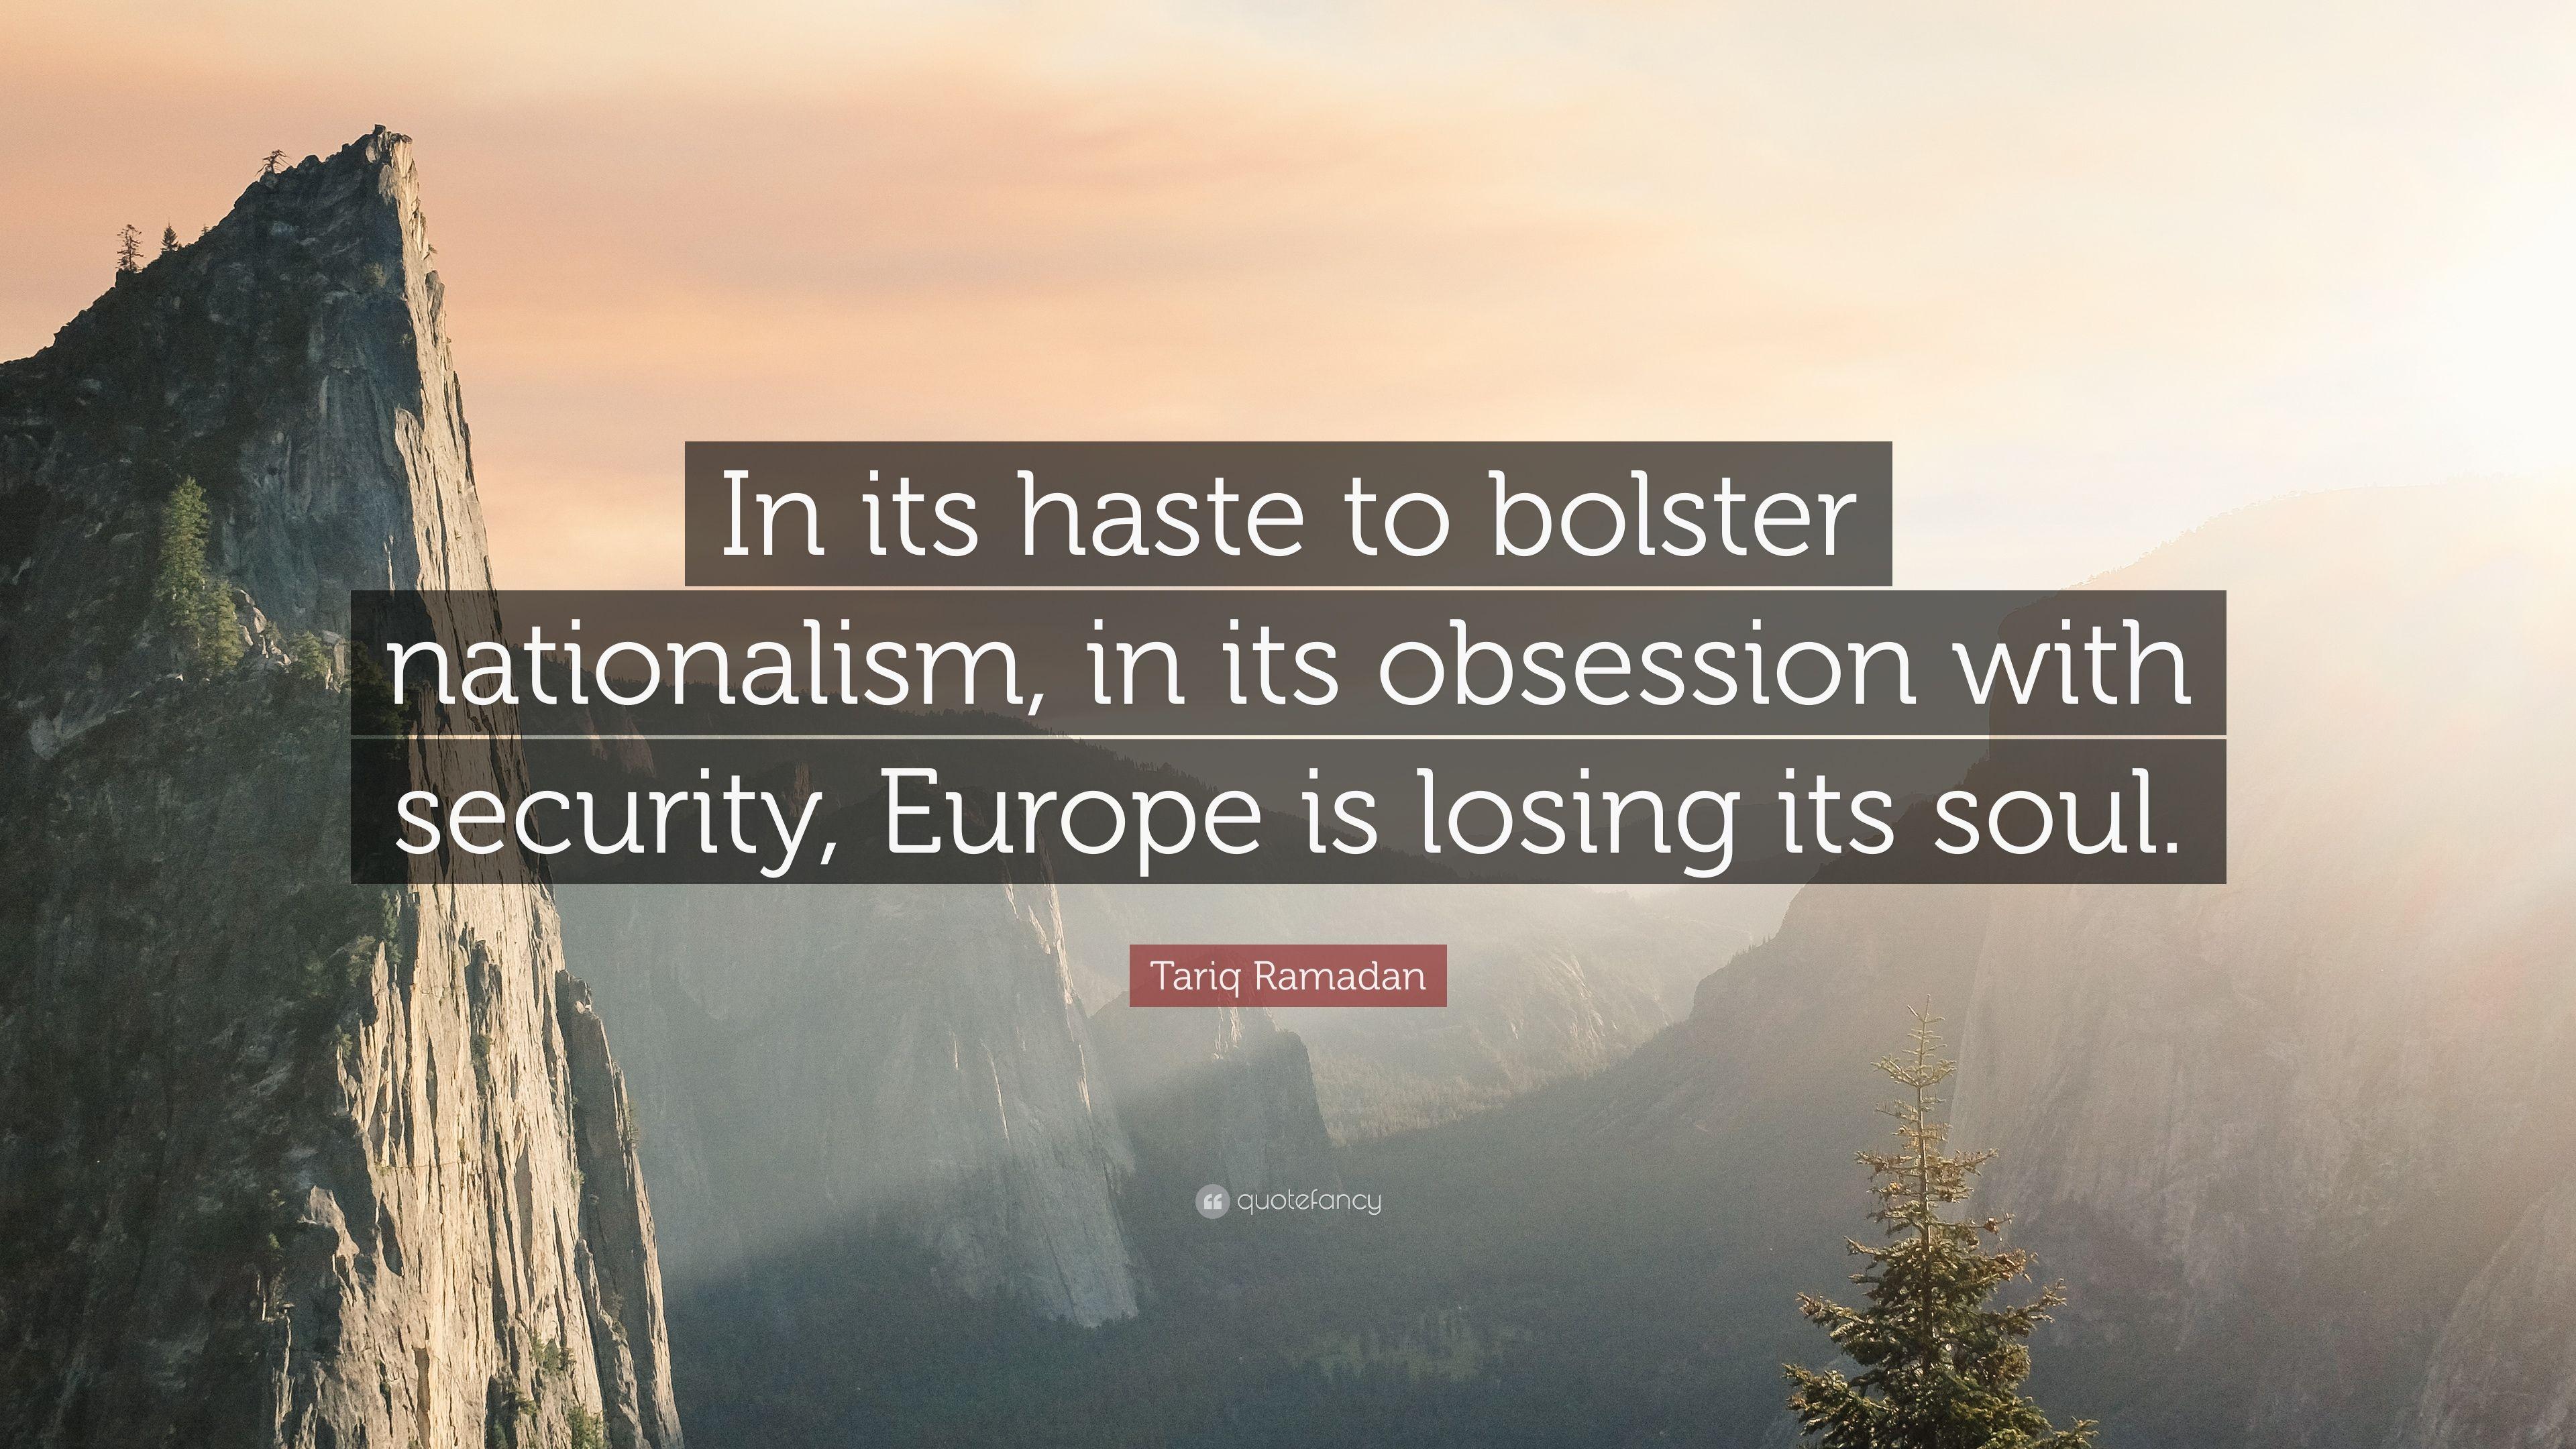 Tariq Ramadan Quote: “In its haste to bolster nationalism, in its